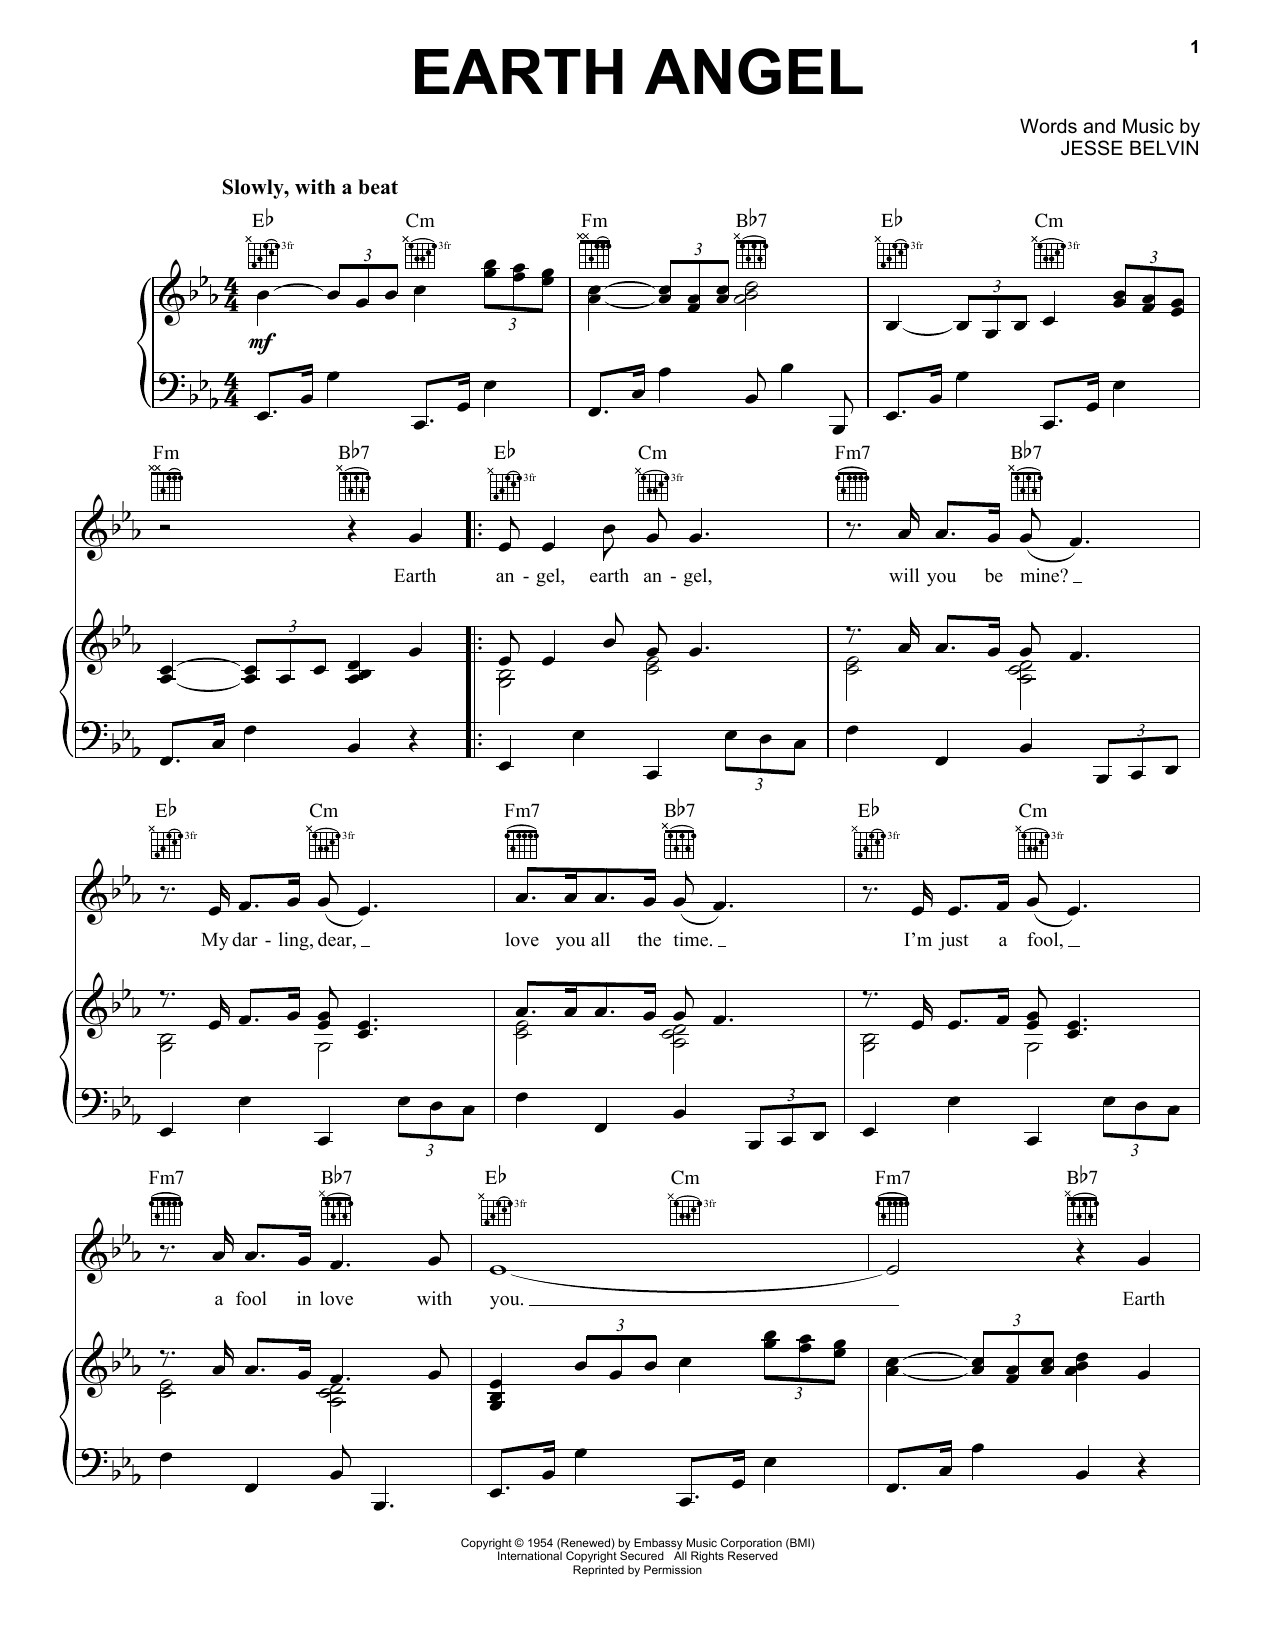 Download The Crew-Cuts Earth Angel Sheet Music